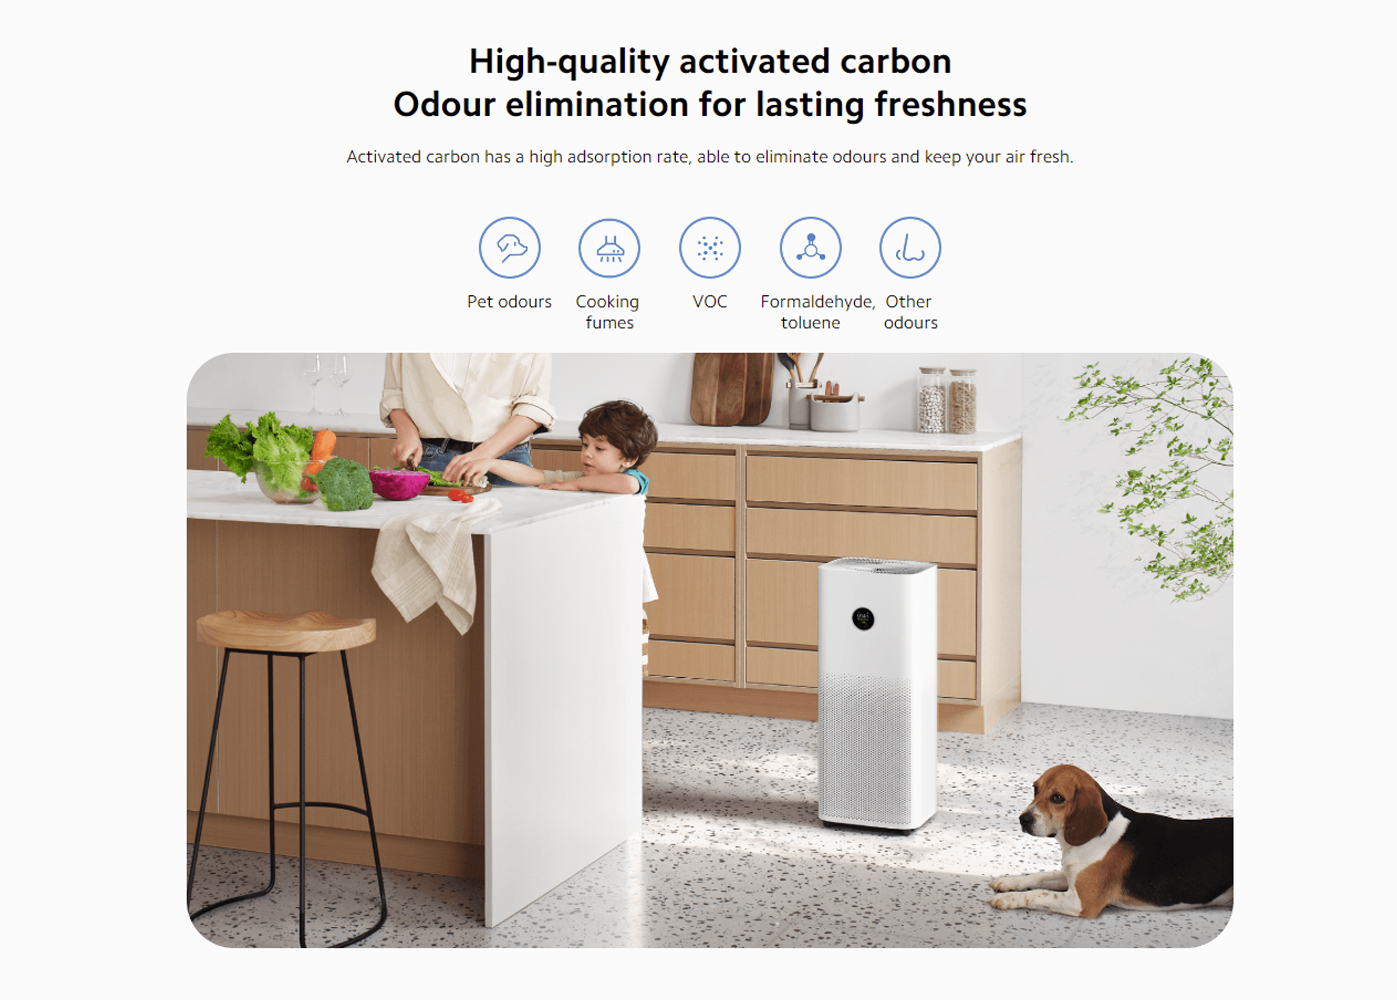 Xiaomi Smart Air Purifier 4 Pro Uk Appvoice Control Suitable For Large Room Cleaner Global Version 500 M3H Pm Cadr Oled Touch 9 Xiaomi &Lt;Table Class=&Quot;A-Normal A-Spacing-Micro&Quot;&Gt; &Lt;Tbody&Gt; &Lt;Tr Class=&Quot;A-Spacing-Small Po-Color&Quot;&Gt; &Lt;Td Class=&Quot;A-Span3&Quot;&Gt;&Lt;Span Class=&Quot;A-Size-Base A-Text-Bold&Quot;&Gt;Colour&Lt;/Span&Gt;&Lt;/Td&Gt; &Lt;Td Class=&Quot;A-Span9&Quot;&Gt;&Lt;Span Class=&Quot;A-Size-Base Po-Break-Word&Quot;&Gt;White&Lt;/Span&Gt;&Lt;/Td&Gt; &Lt;/Tr&Gt; &Lt;Tr Class=&Quot;A-Spacing-Small Po-Brand&Quot;&Gt; &Lt;Td Class=&Quot;A-Span3&Quot;&Gt;&Lt;Span Class=&Quot;A-Size-Base A-Text-Bold&Quot;&Gt;Brand&Lt;/Span&Gt;&Lt;/Td&Gt; &Lt;Td Class=&Quot;A-Span9&Quot;&Gt;&Lt;Span Class=&Quot;A-Size-Base Po-Break-Word&Quot;&Gt;Xiaomi&Lt;/Span&Gt;&Lt;/Td&Gt; &Lt;/Tr&Gt; &Lt;Tr Class=&Quot;A-Spacing-Small Po-Item_Depth_Width_Height&Quot;&Gt; &Lt;Td Class=&Quot;A-Span3&Quot;&Gt;&Lt;Span Class=&Quot;A-Size-Base A-Text-Bold&Quot;&Gt;Product Dimensions&Lt;/Span&Gt;&Lt;/Td&Gt; &Lt;Td Class=&Quot;A-Span9&Quot;&Gt;&Lt;Span Class=&Quot;A-Size-Base Po-Break-Word&Quot;&Gt;27.5D X 27.5W X 68H Centimeters&Lt;/Span&Gt;&Lt;/Td&Gt; &Lt;/Tr&Gt; &Lt;Tr Class=&Quot;A-Spacing-Small Po-Power_Source_Type&Quot;&Gt; &Lt;Td Class=&Quot;A-Span3&Quot;&Gt;&Lt;Span Class=&Quot;A-Size-Base A-Text-Bold&Quot;&Gt;Power Source&Lt;/Span&Gt;&Lt;/Td&Gt; &Lt;Td Class=&Quot;A-Span9&Quot;&Gt;&Lt;Span Class=&Quot;A-Size-Base Po-Break-Word&Quot;&Gt;Corded Electric&Lt;/Span&Gt;&Lt;/Td&Gt; &Lt;/Tr&Gt; &Lt;Tr Class=&Quot;A-Spacing-Small Po-Item_Weight&Quot;&Gt; &Lt;Td Class=&Quot;A-Span3&Quot;&Gt;&Lt;Span Class=&Quot;A-Size-Base A-Text-Bold&Quot;&Gt;Item Weight&Lt;/Span&Gt;&Lt;/Td&Gt; &Lt;Td Class=&Quot;A-Span9&Quot;&Gt;&Lt;Span Class=&Quot;A-Size-Base Po-Break-Word&Quot;&Gt;6.8 Kilograms&Lt;/Span&Gt;&Lt;/Td&Gt; &Lt;/Tr&Gt; &Lt;/Tbody&Gt; &Lt;/Table&Gt; &Lt;H5&Gt;We Also Provide International Wholesale And Retail Shipping To All Gcc Countries: Saudi Arabia, Qatar, Oman, Kuwait, Bahrain.&Lt;/H5&Gt; Xiaomi Xiaomi Smart Air Purifier 4 Pro